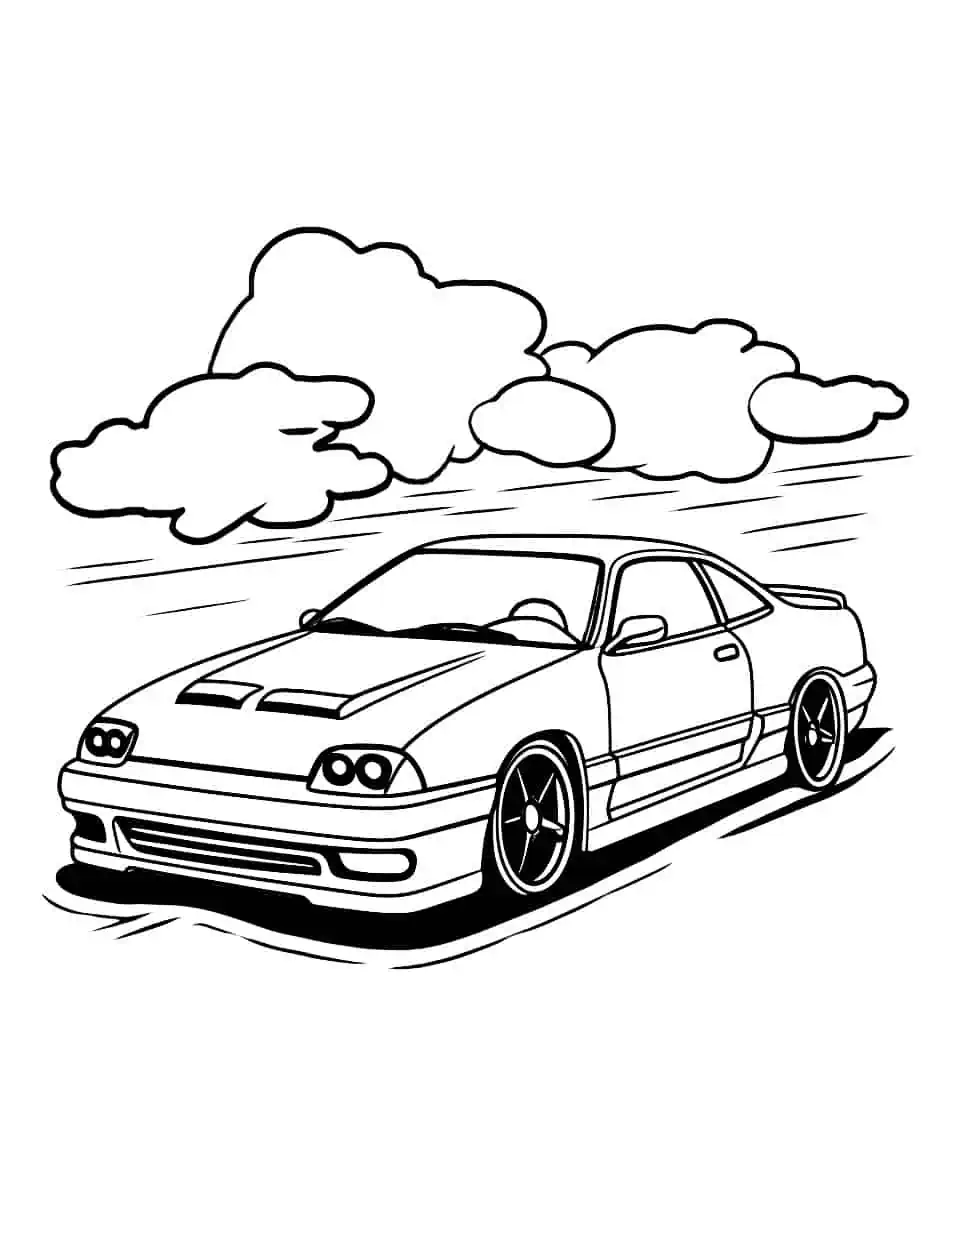 JDM Drift Car Coloring Page - A Japanese car drifting on the street, creating a cloud of smoke.